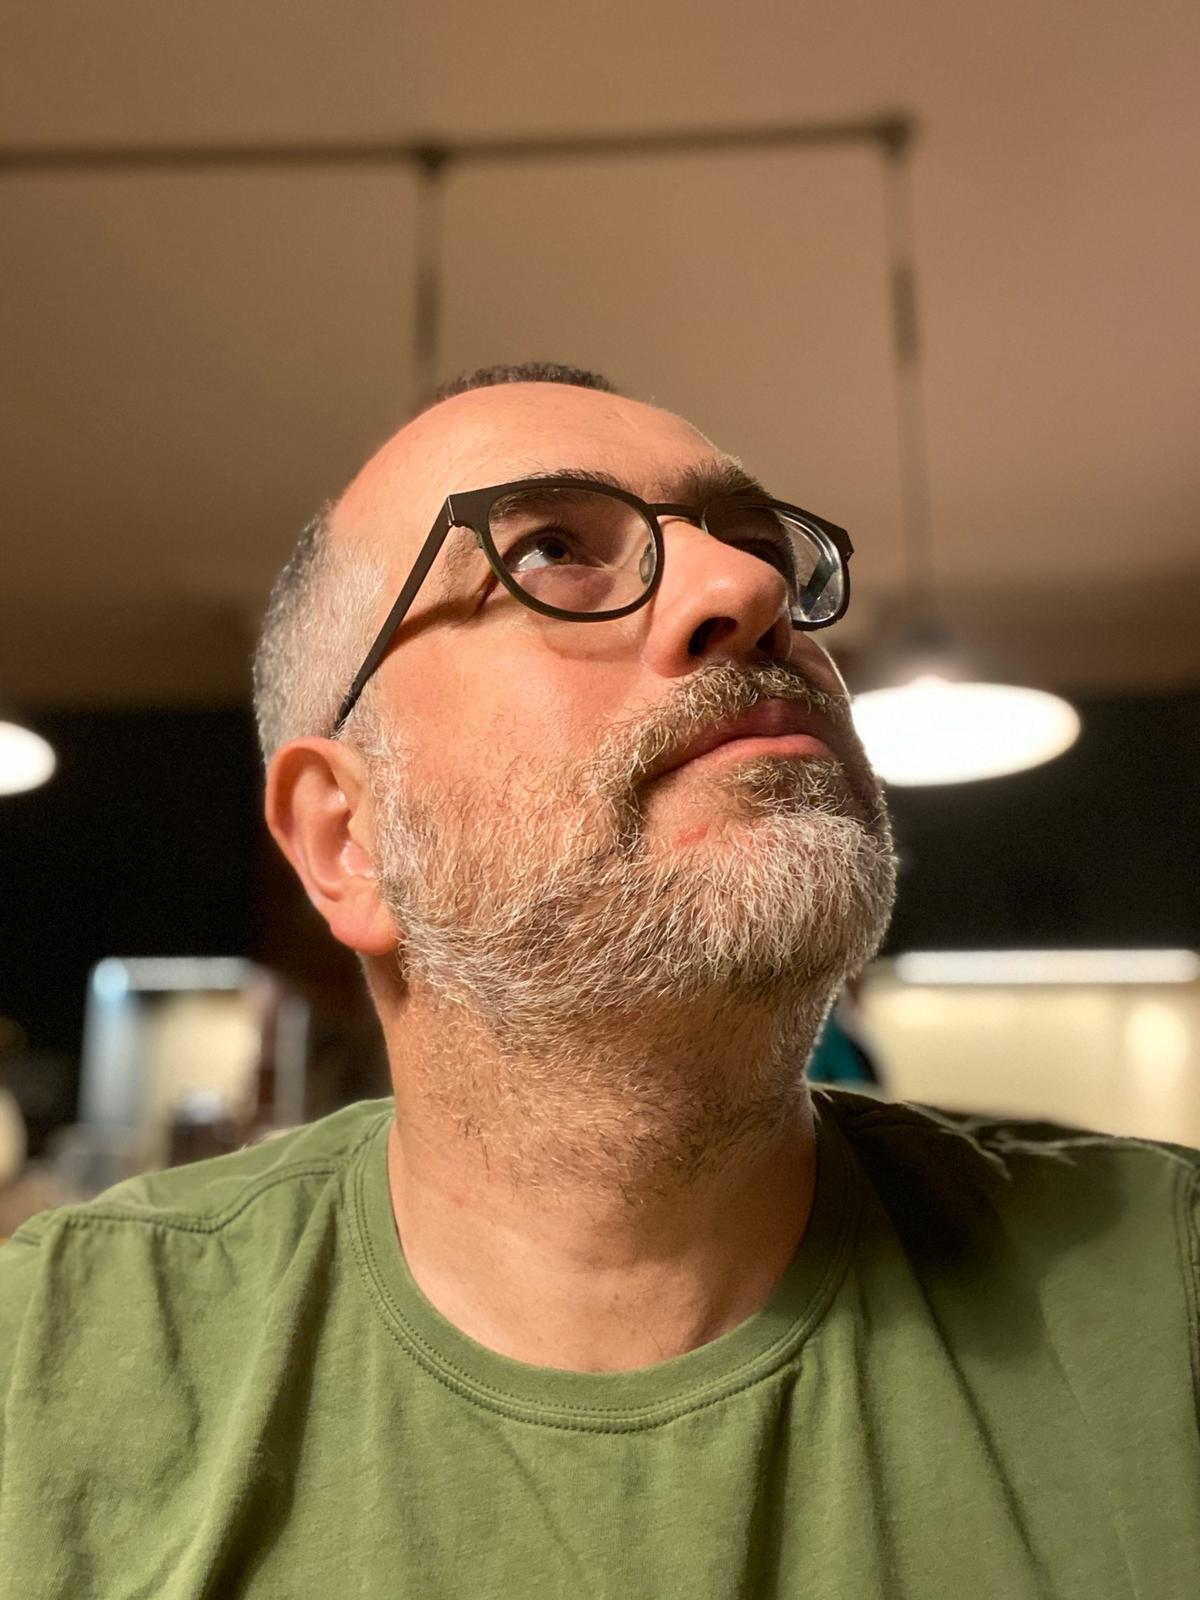 A man with greying, close-cropped hair looks up and to the right. He wears glasses and a green t-shirt.